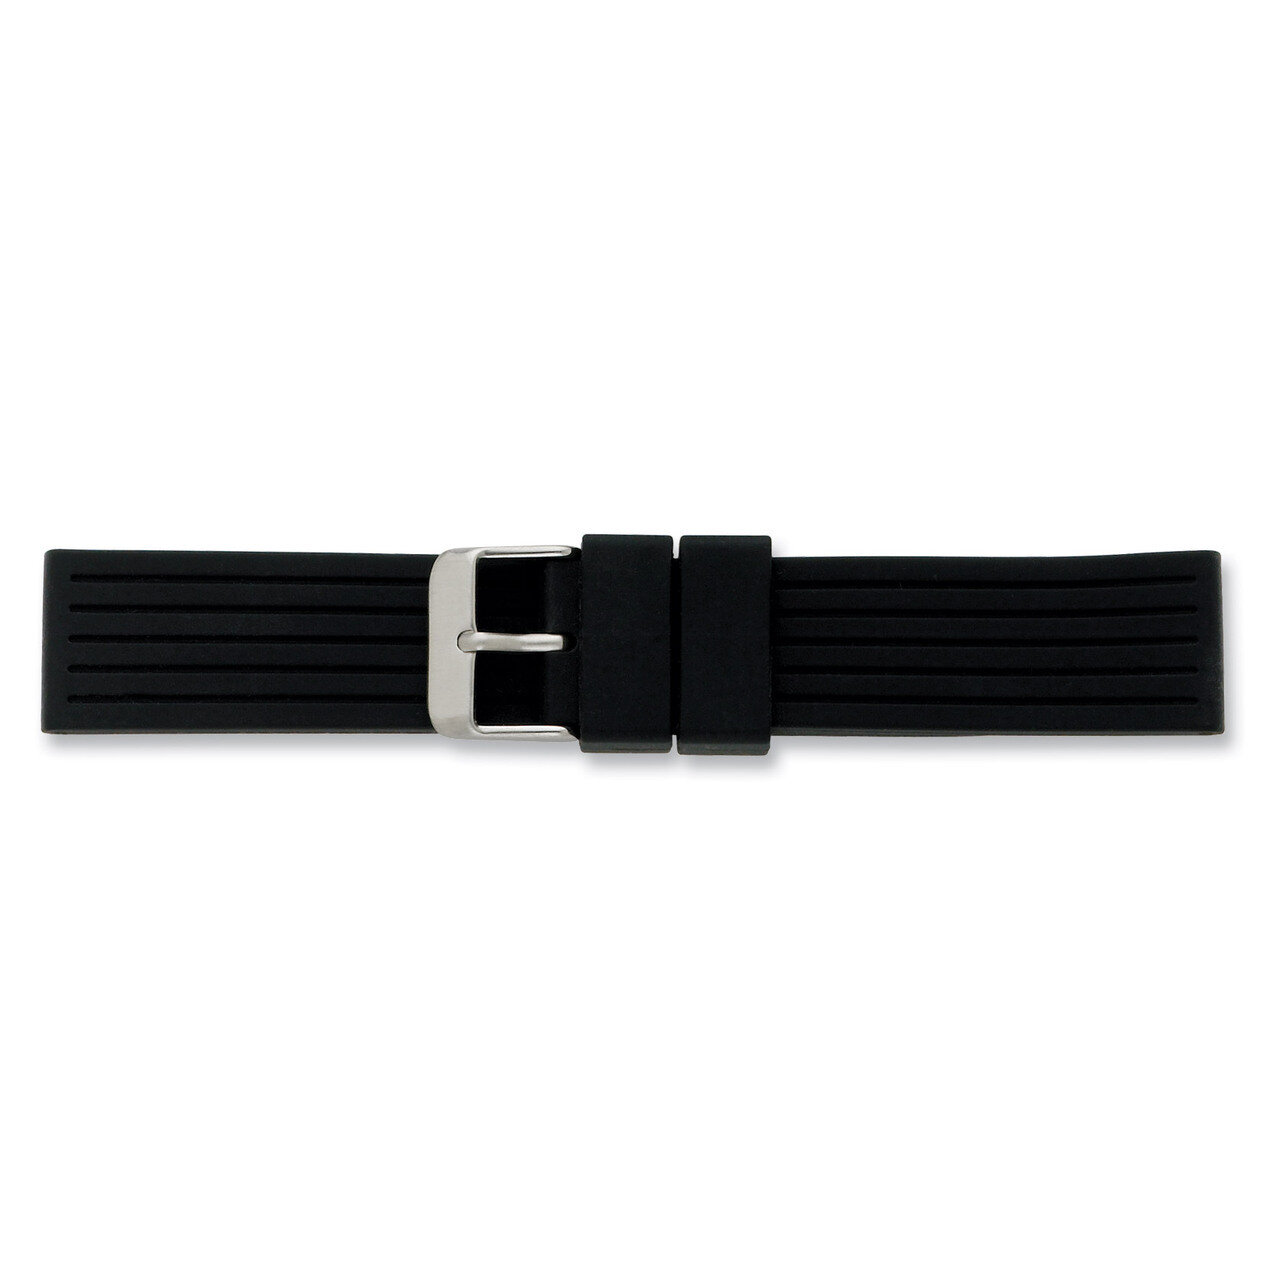 20mm Black Striped Silicone Rubber Watch Band 8 Inch Silver-tone Buckle BA221-20